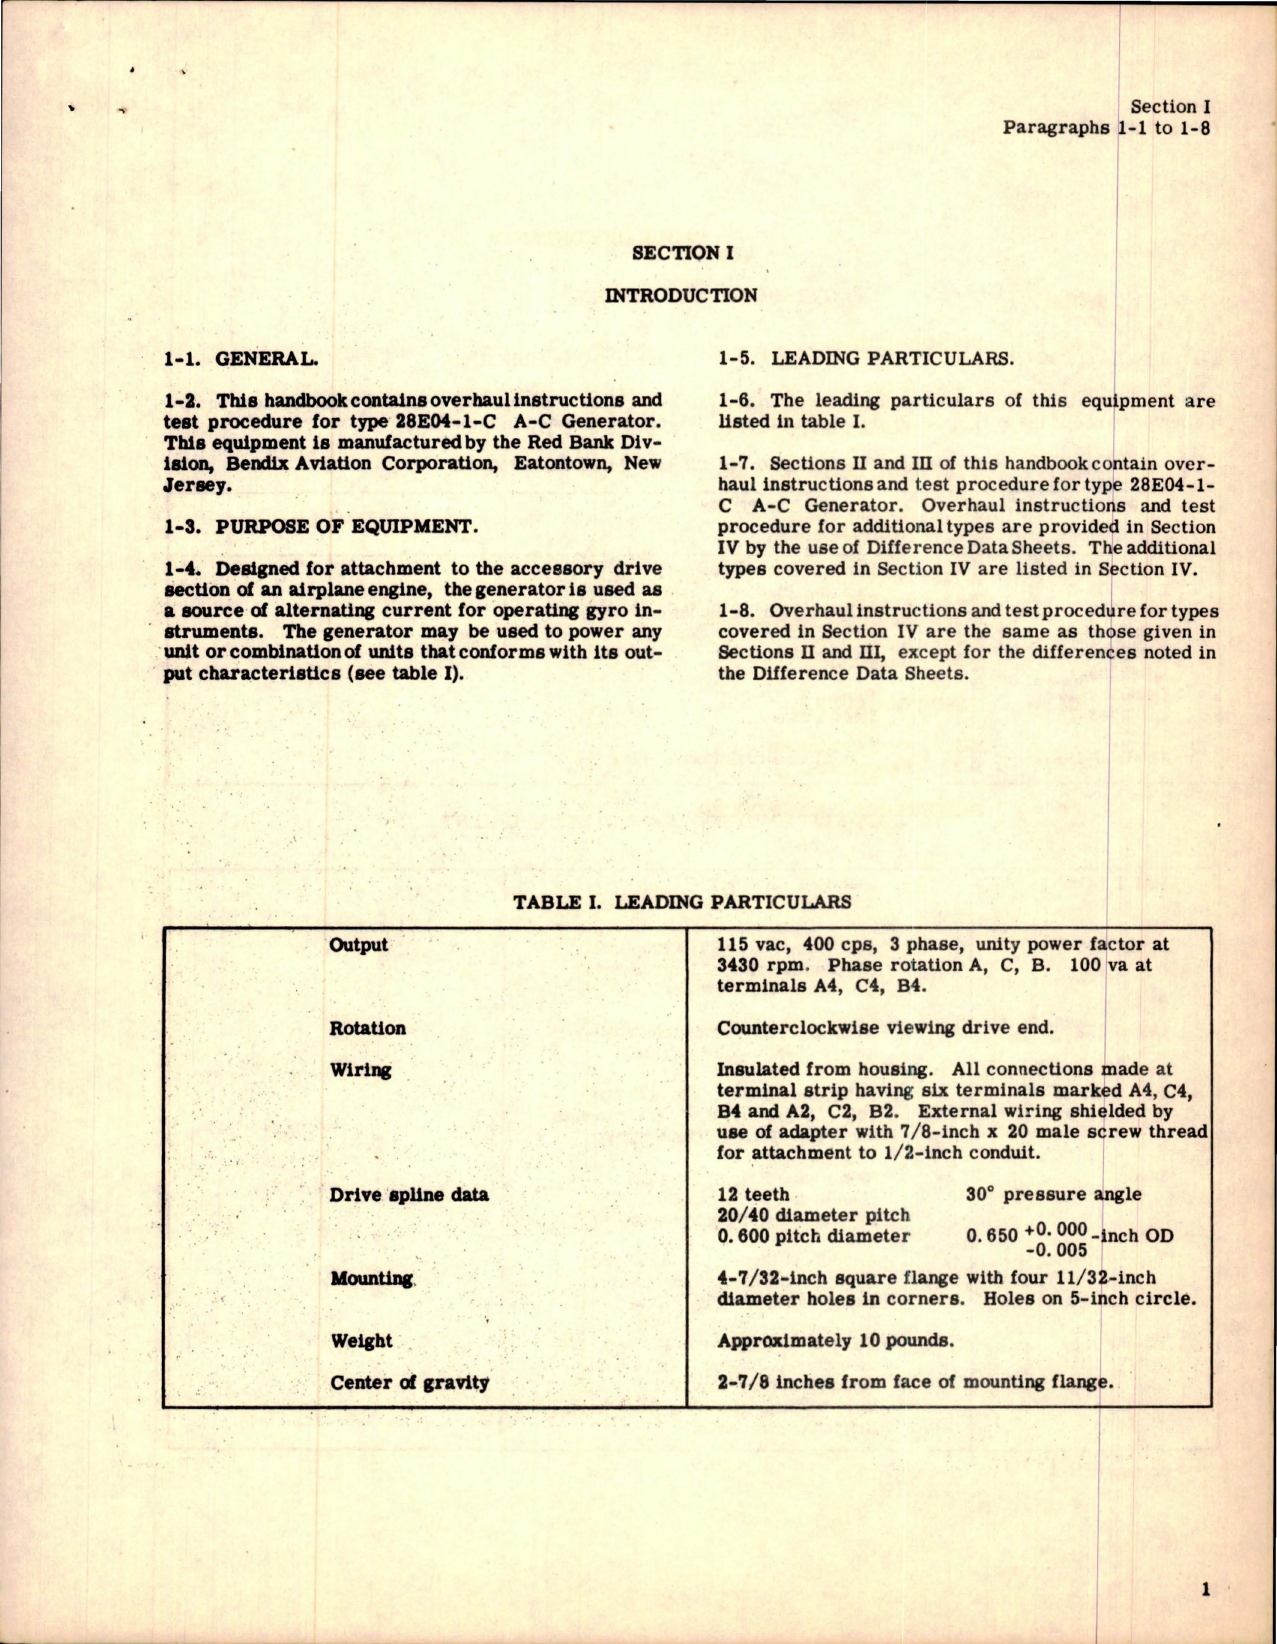 Sample page 5 from AirCorps Library document: Overhaul Instructions for A-C Generator - Type 28E04-1-C, 28E04-1-D, 28E04-1-E 